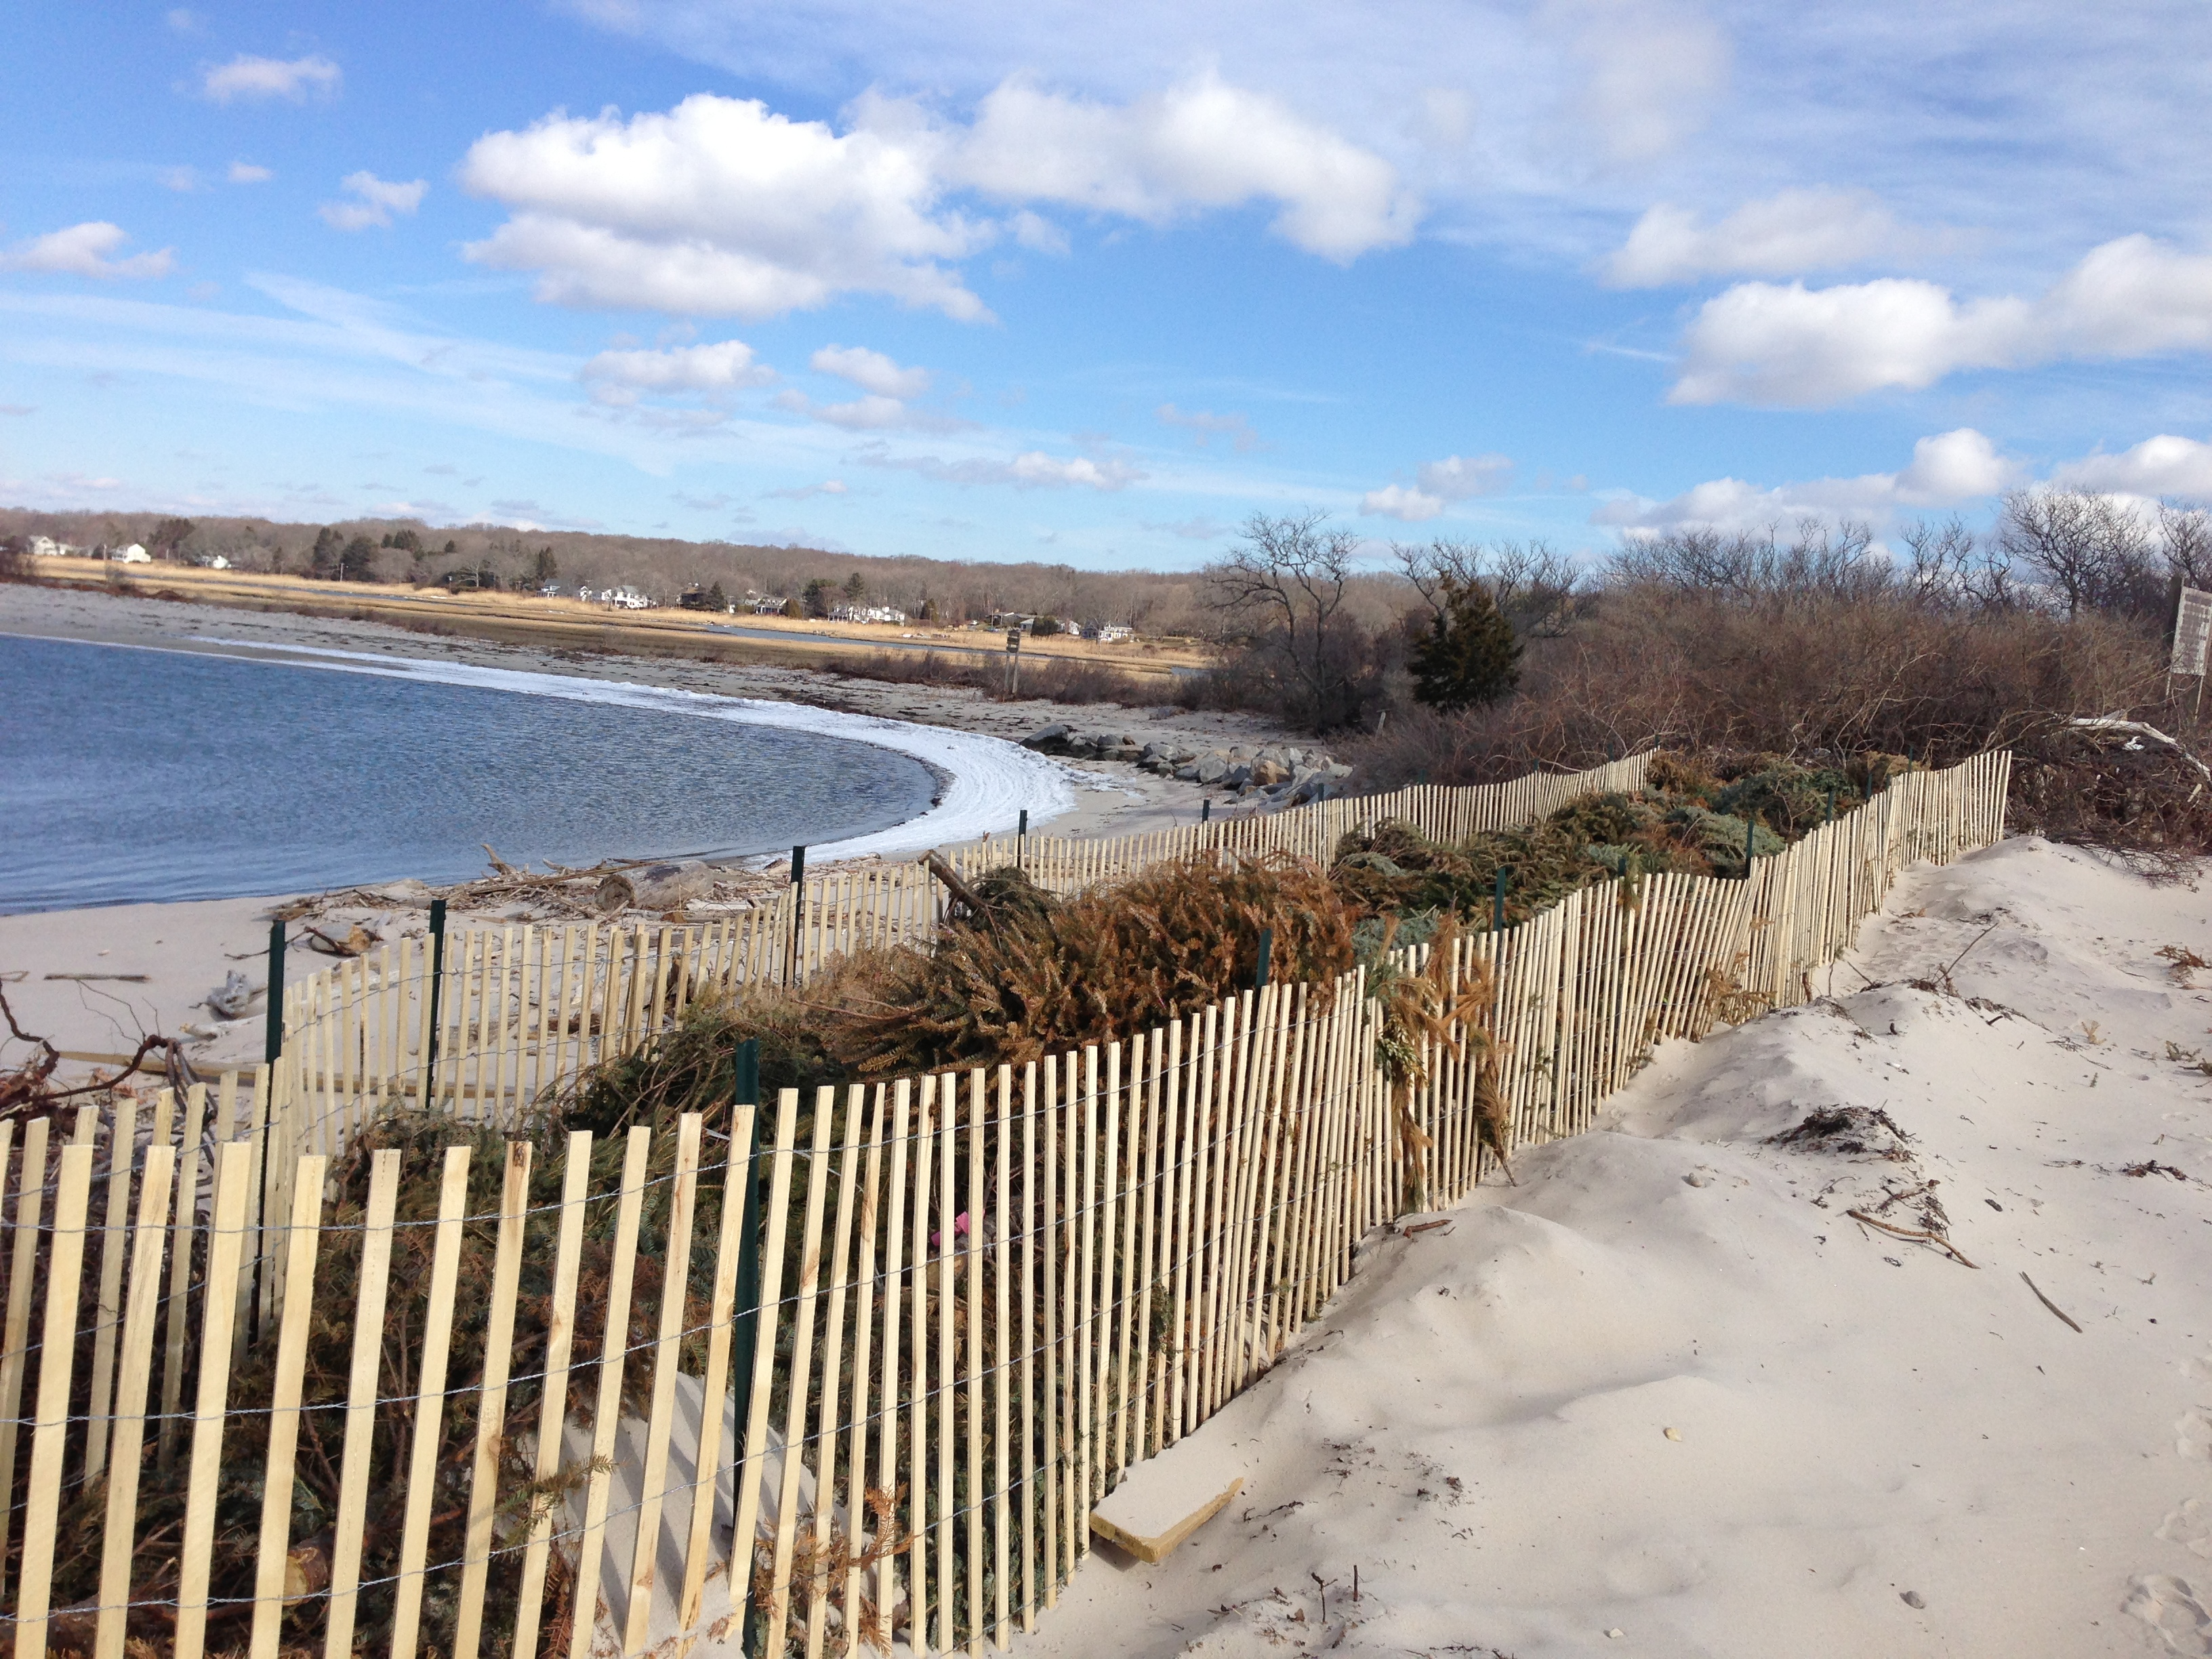 Use of Christmas trees on dune at Old Black Point Beach.